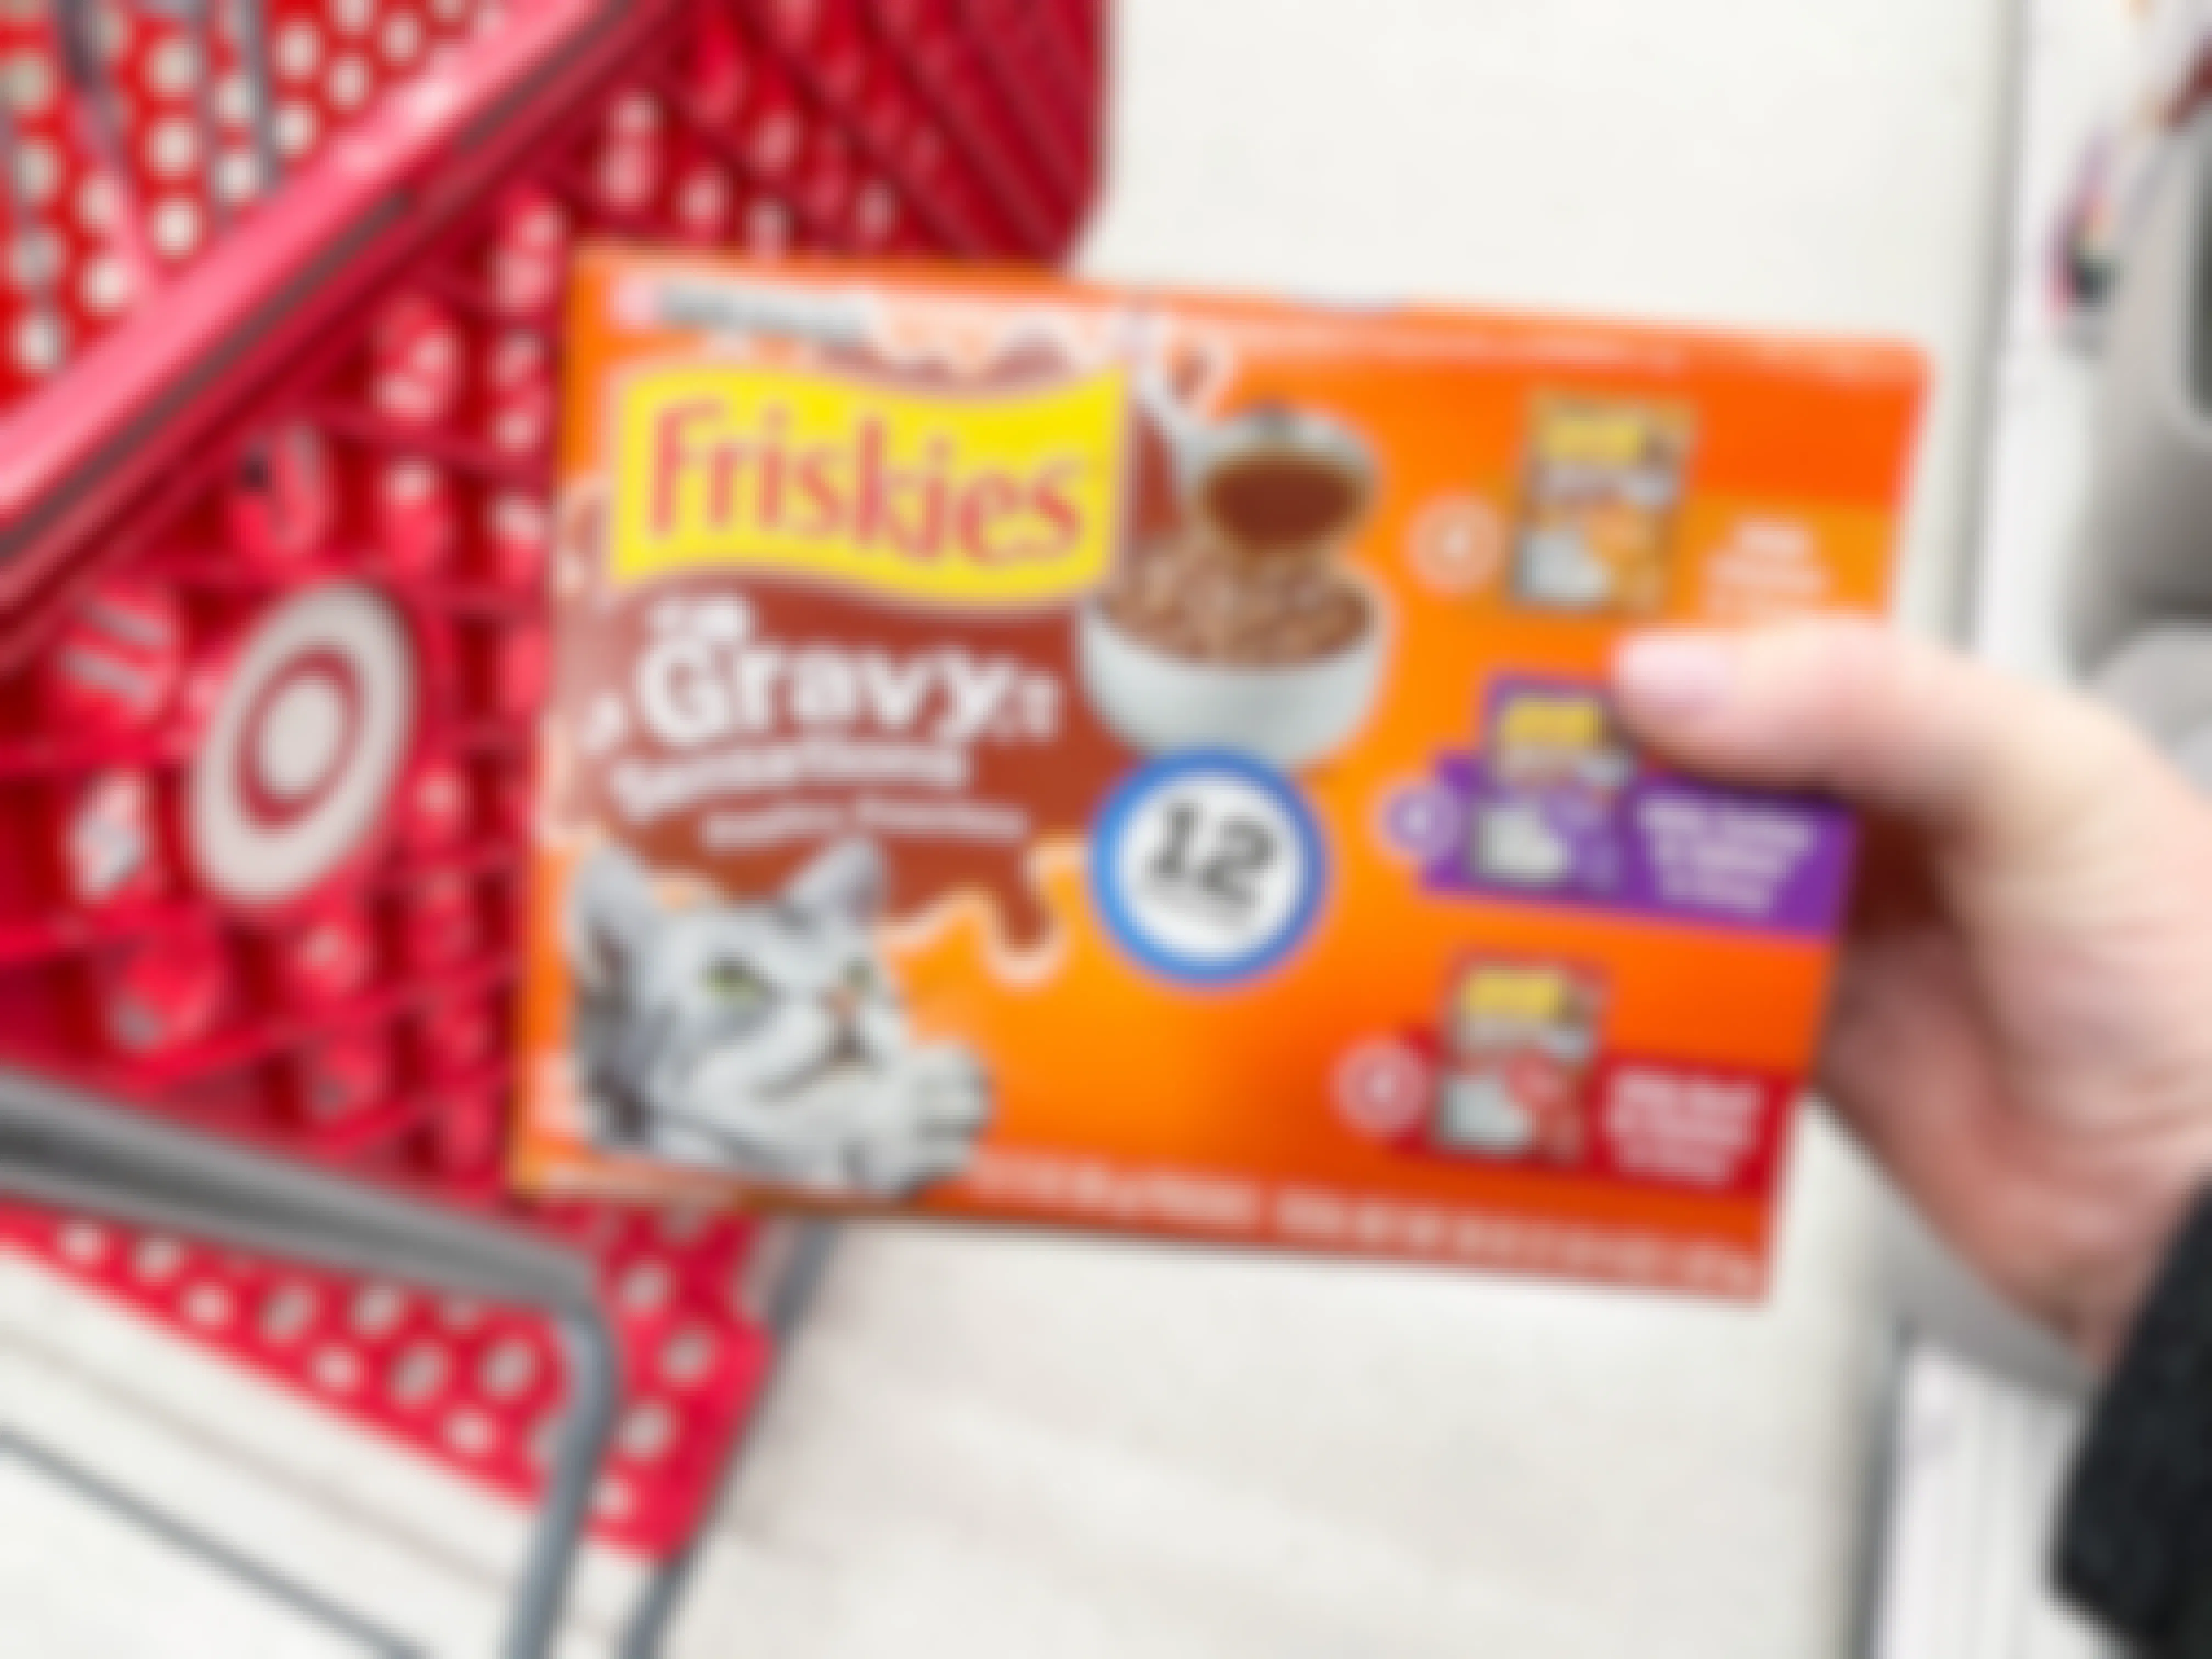 a box of Friskies wet cat food being held in front of target cart